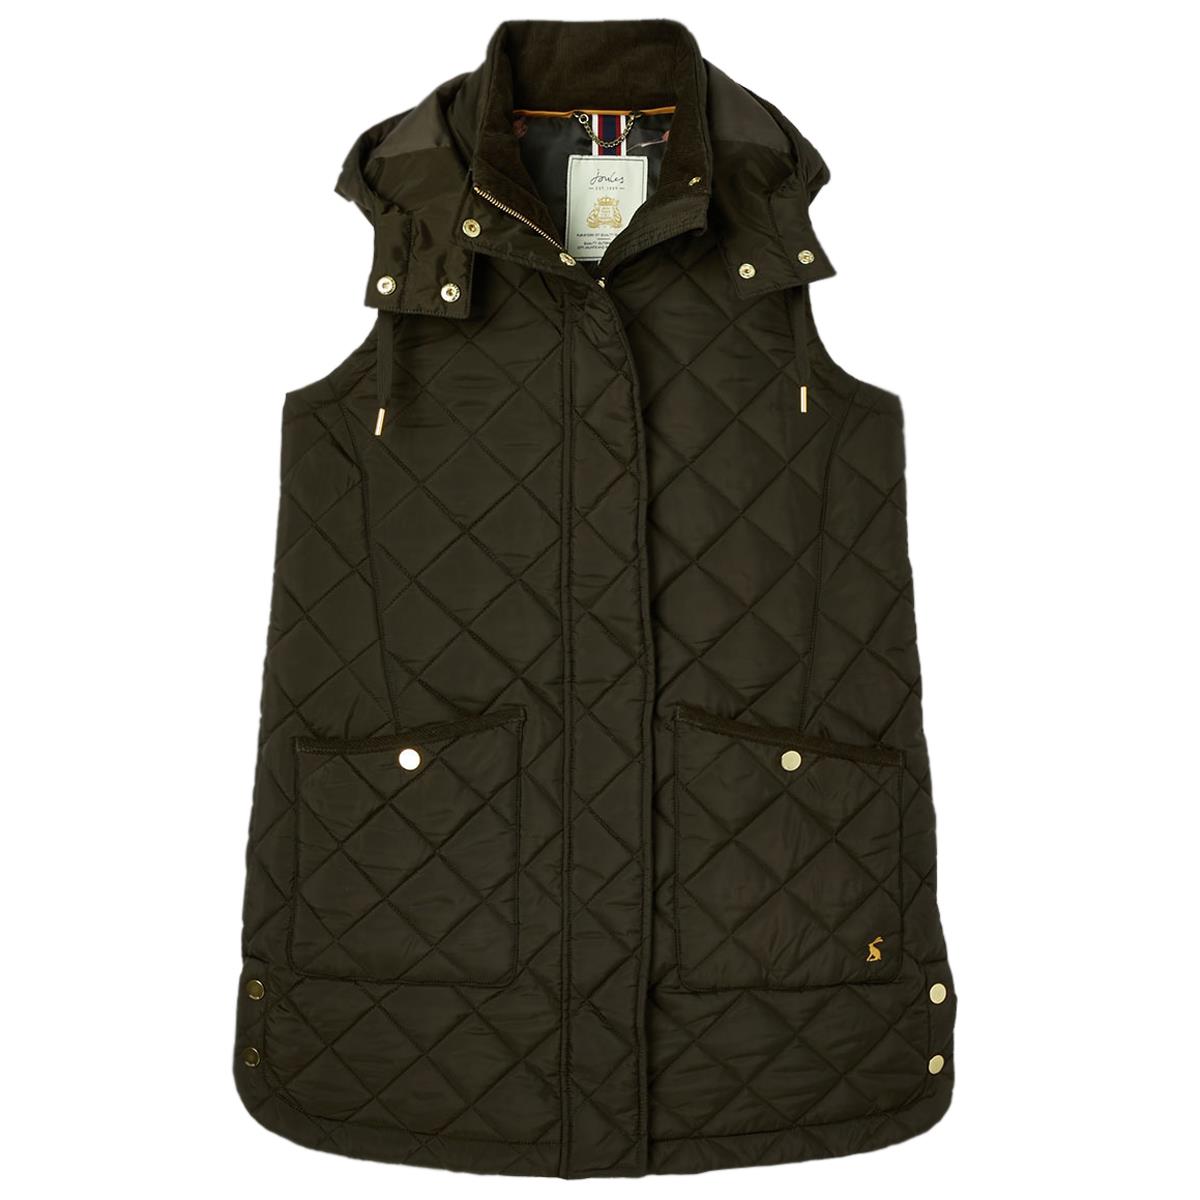 How long is the joules chatham gilet?